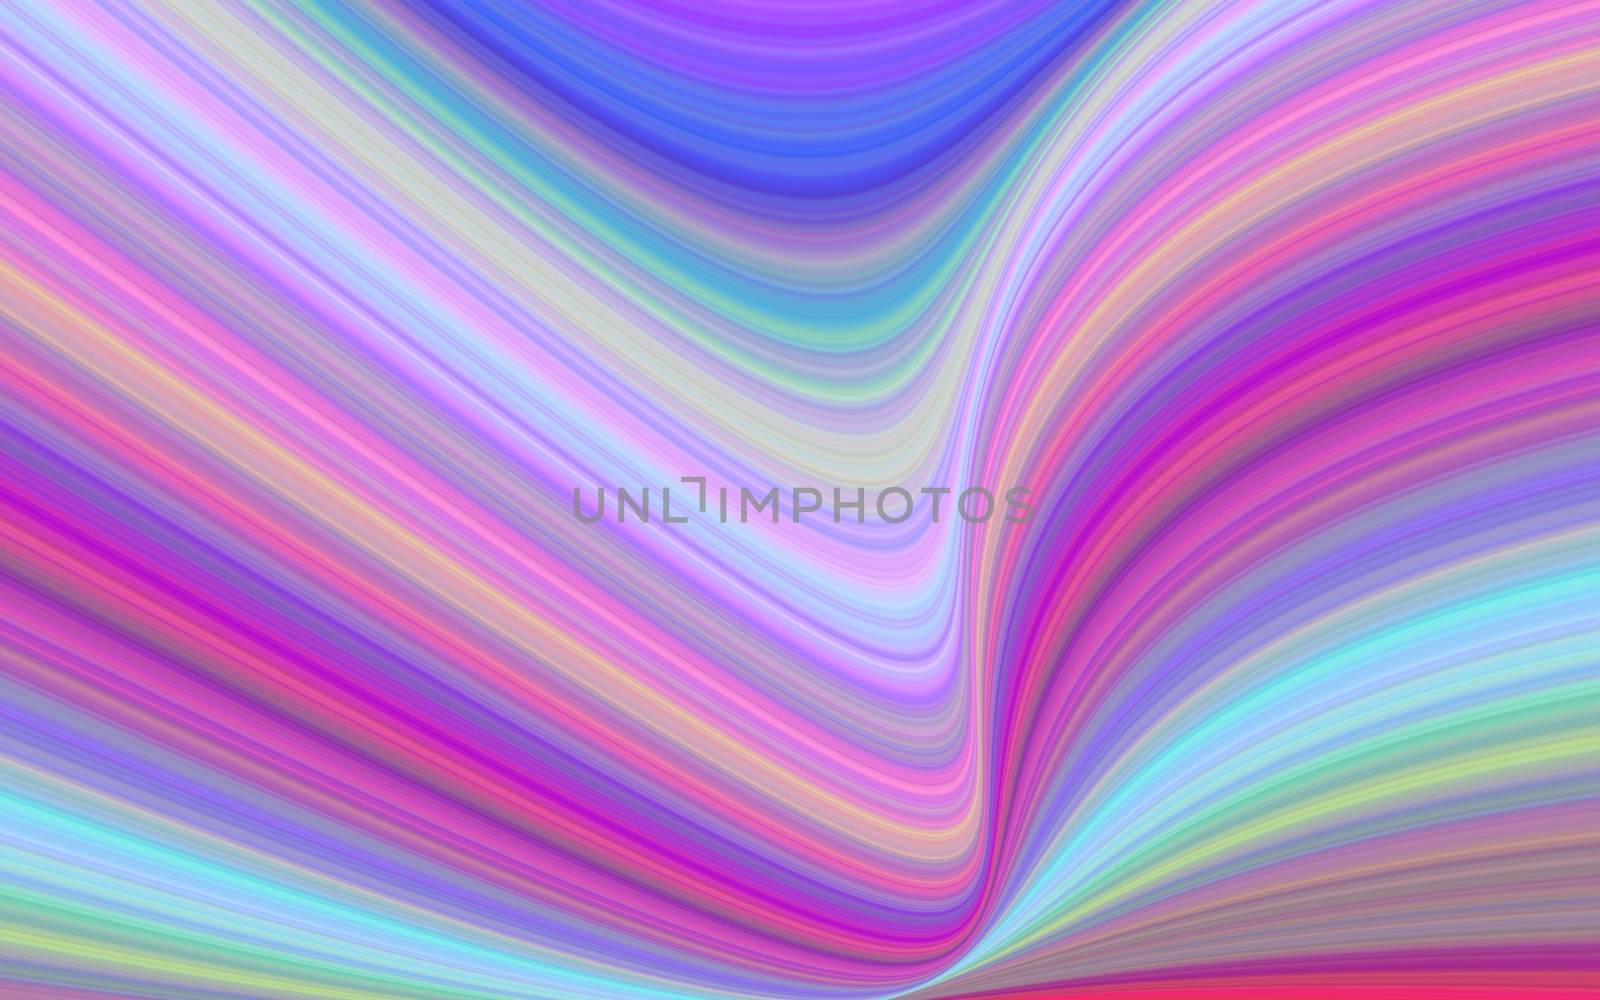 abstract colorful background with colorful wave lines. by a3701027